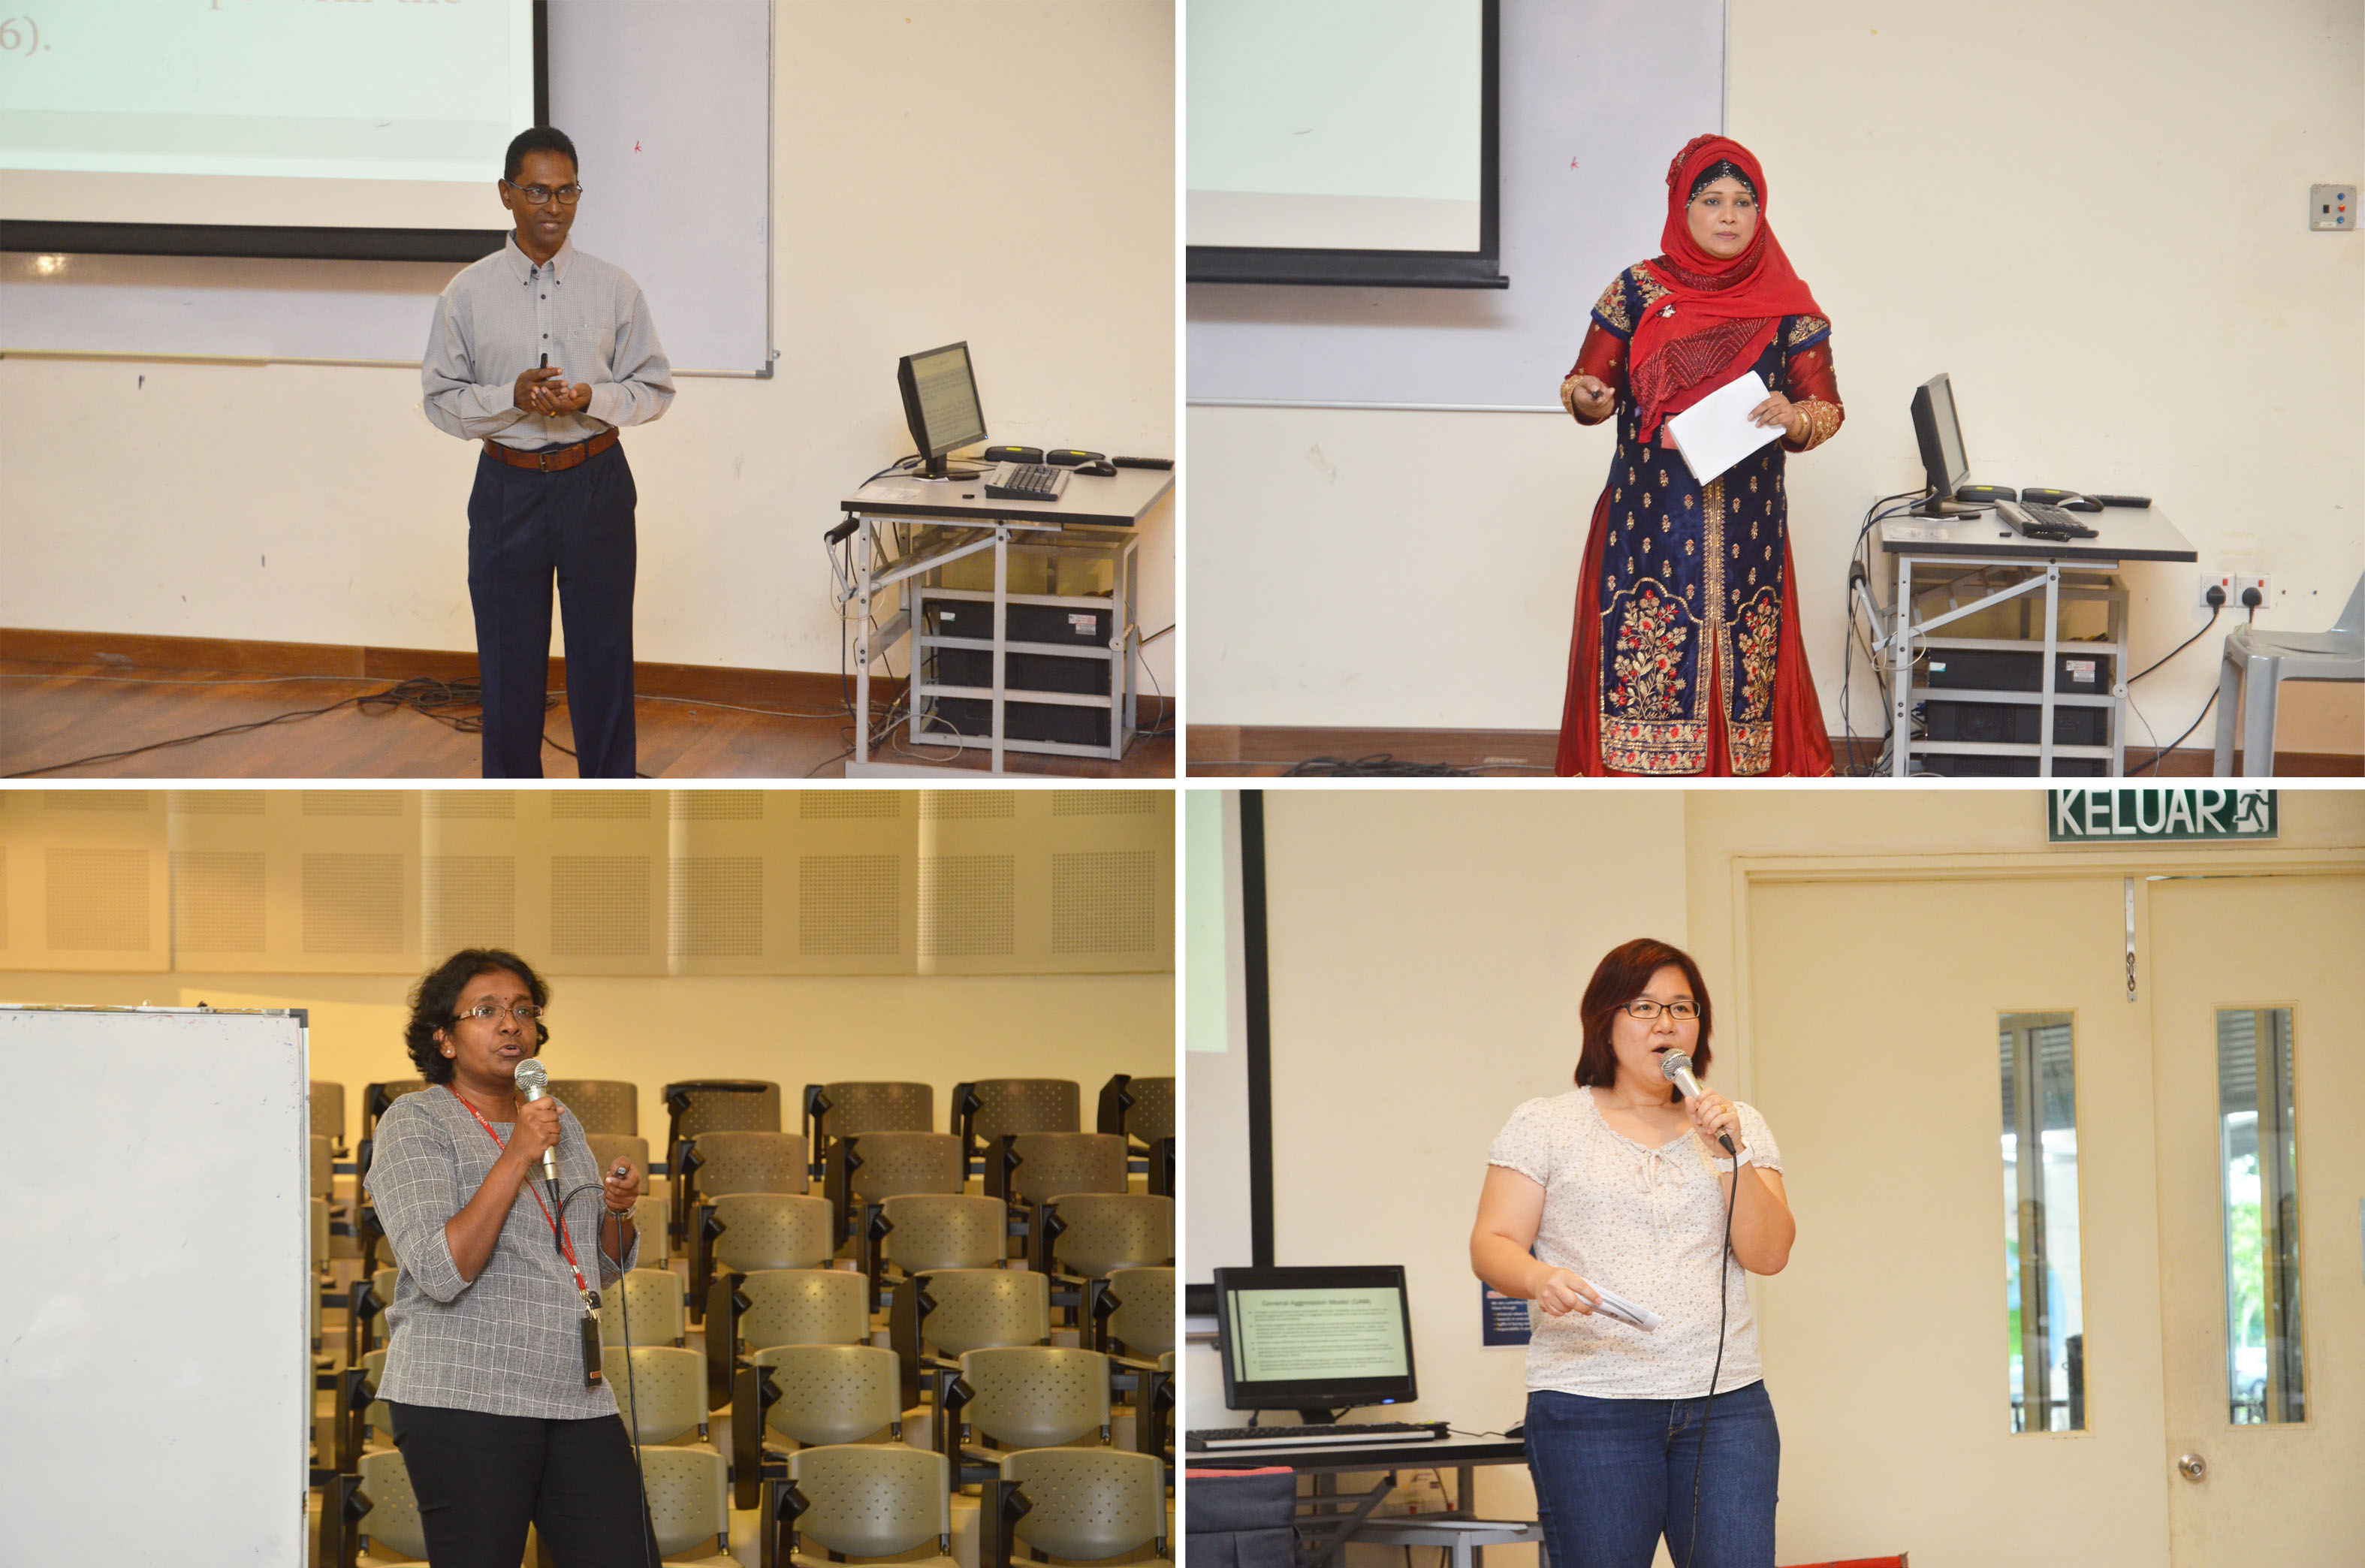 Presenters, clockwise from top left: Dr Gerard, Dr Sultana, Dr Tan and Dr Sumathi